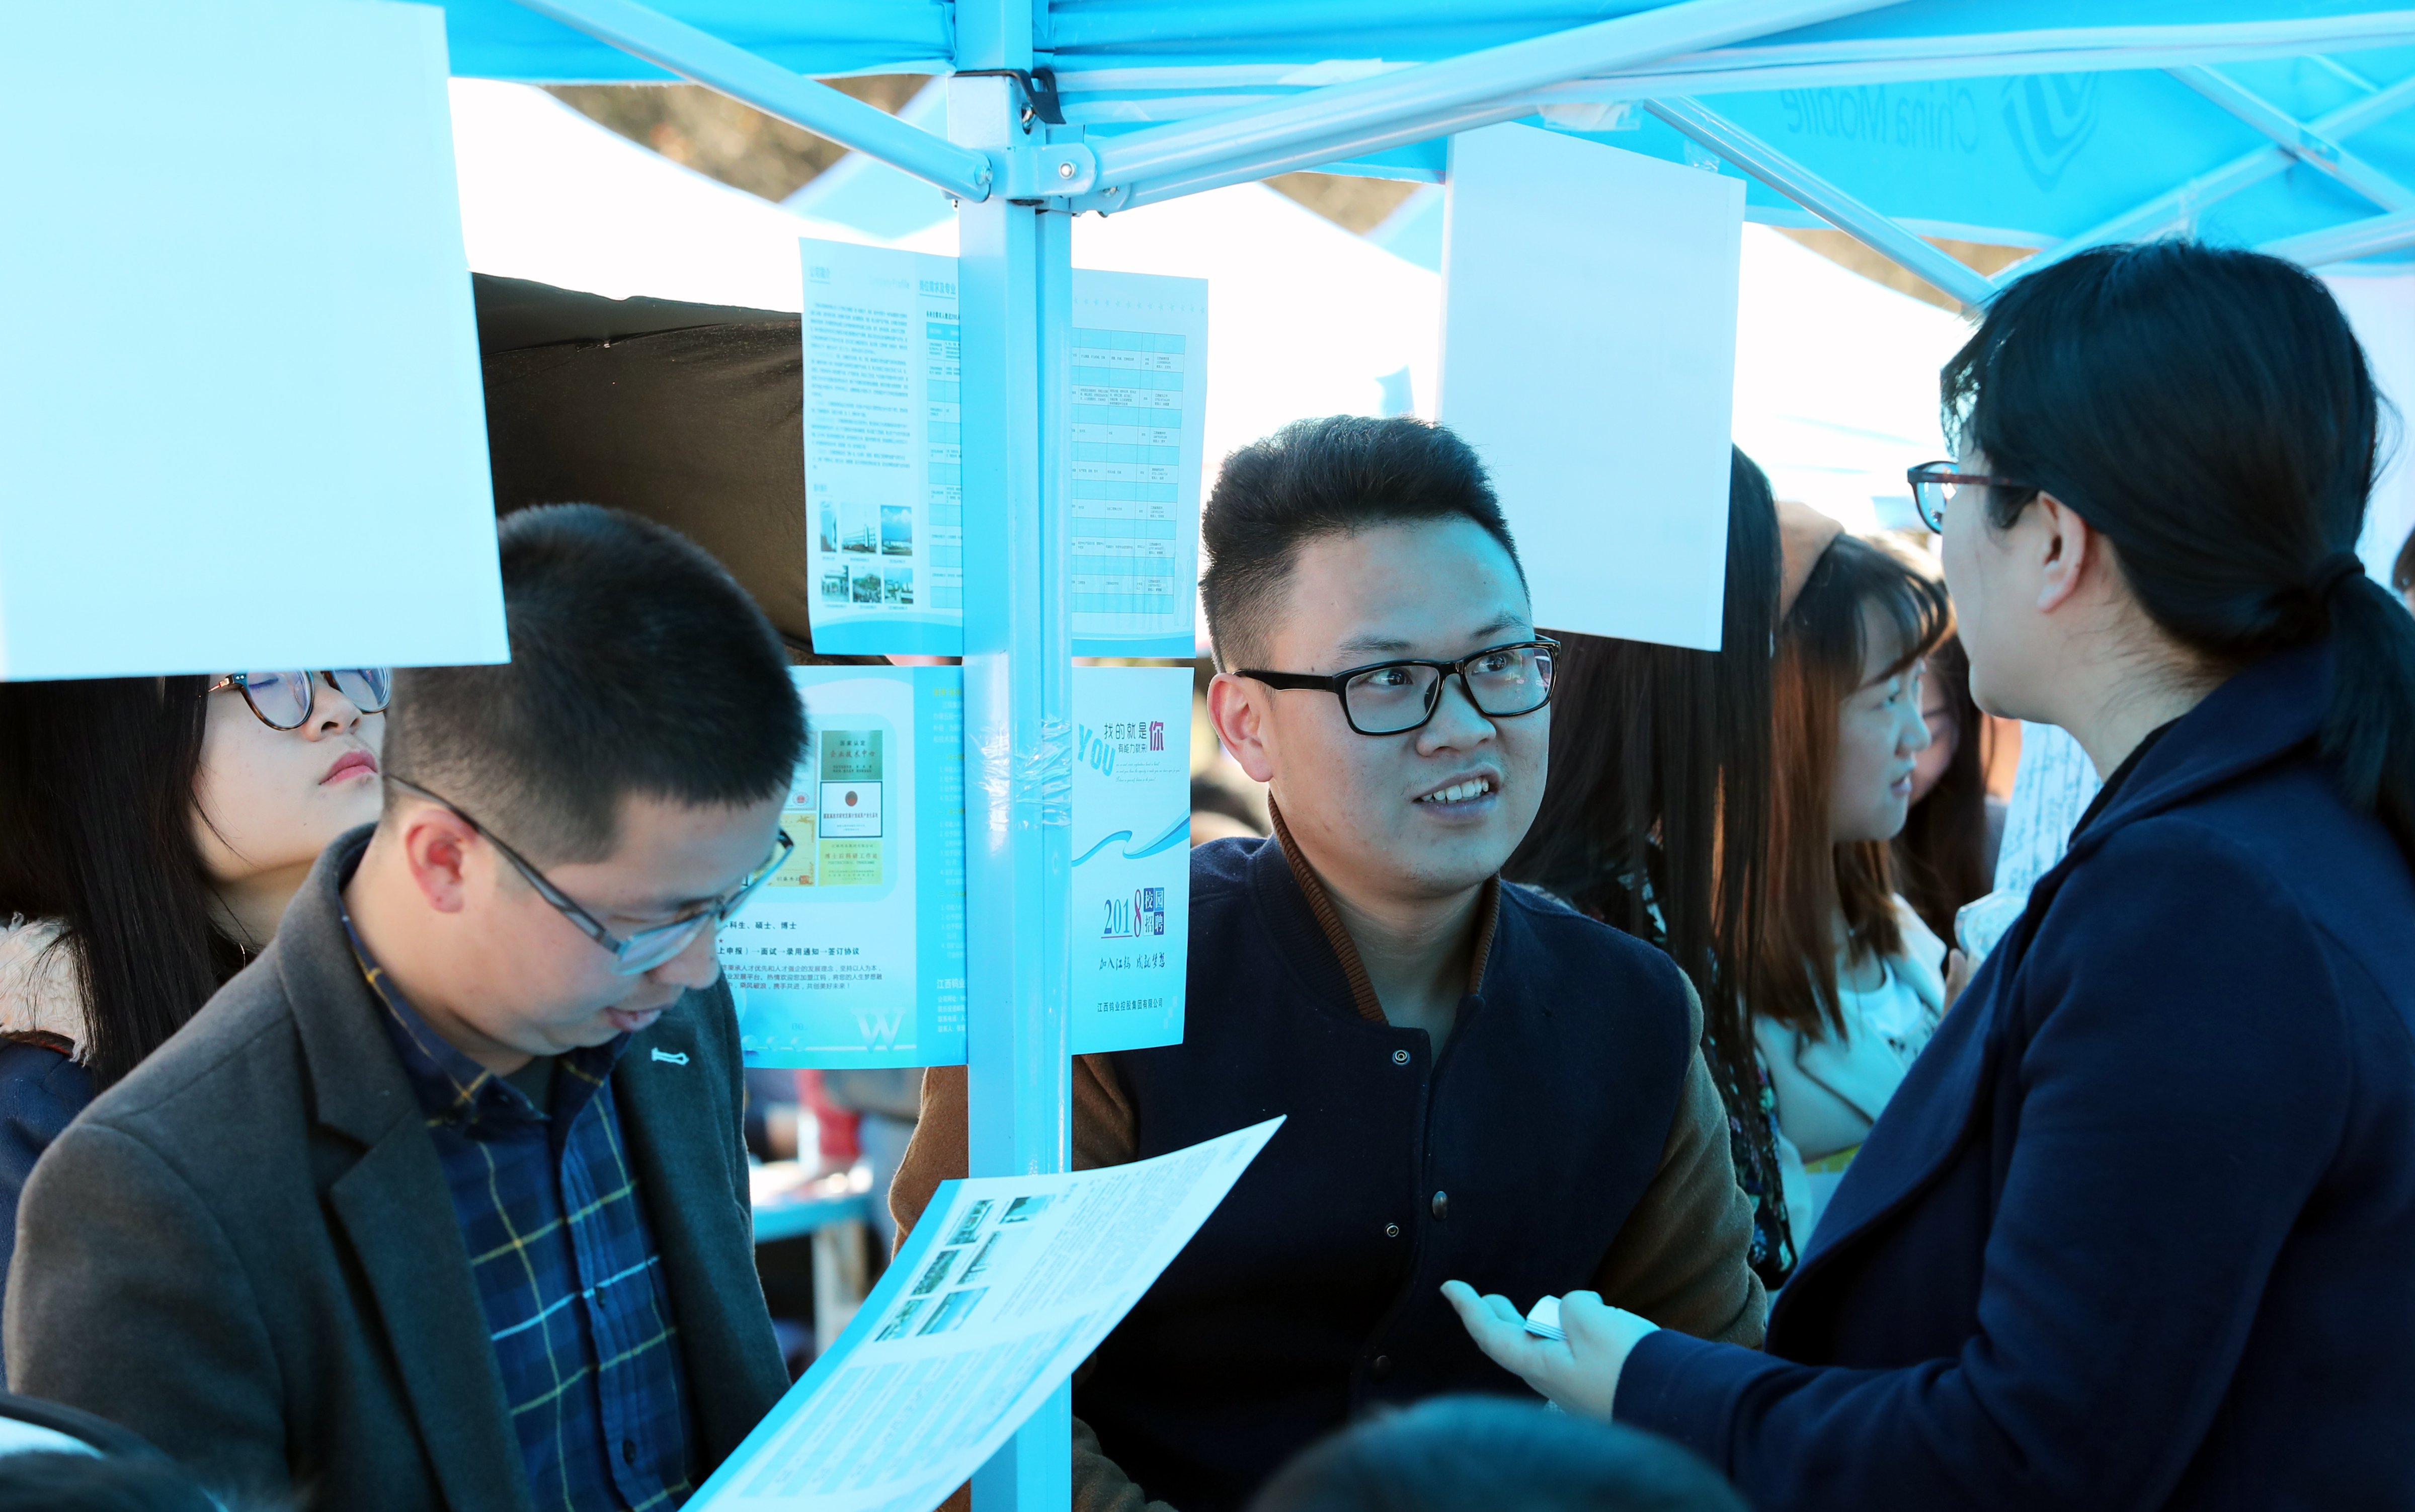 Chinese graduates talk with interviewers at a job fair in the Kunming University of Science and Technology in Kunming city. (Yang Zheng/Imaginechina)